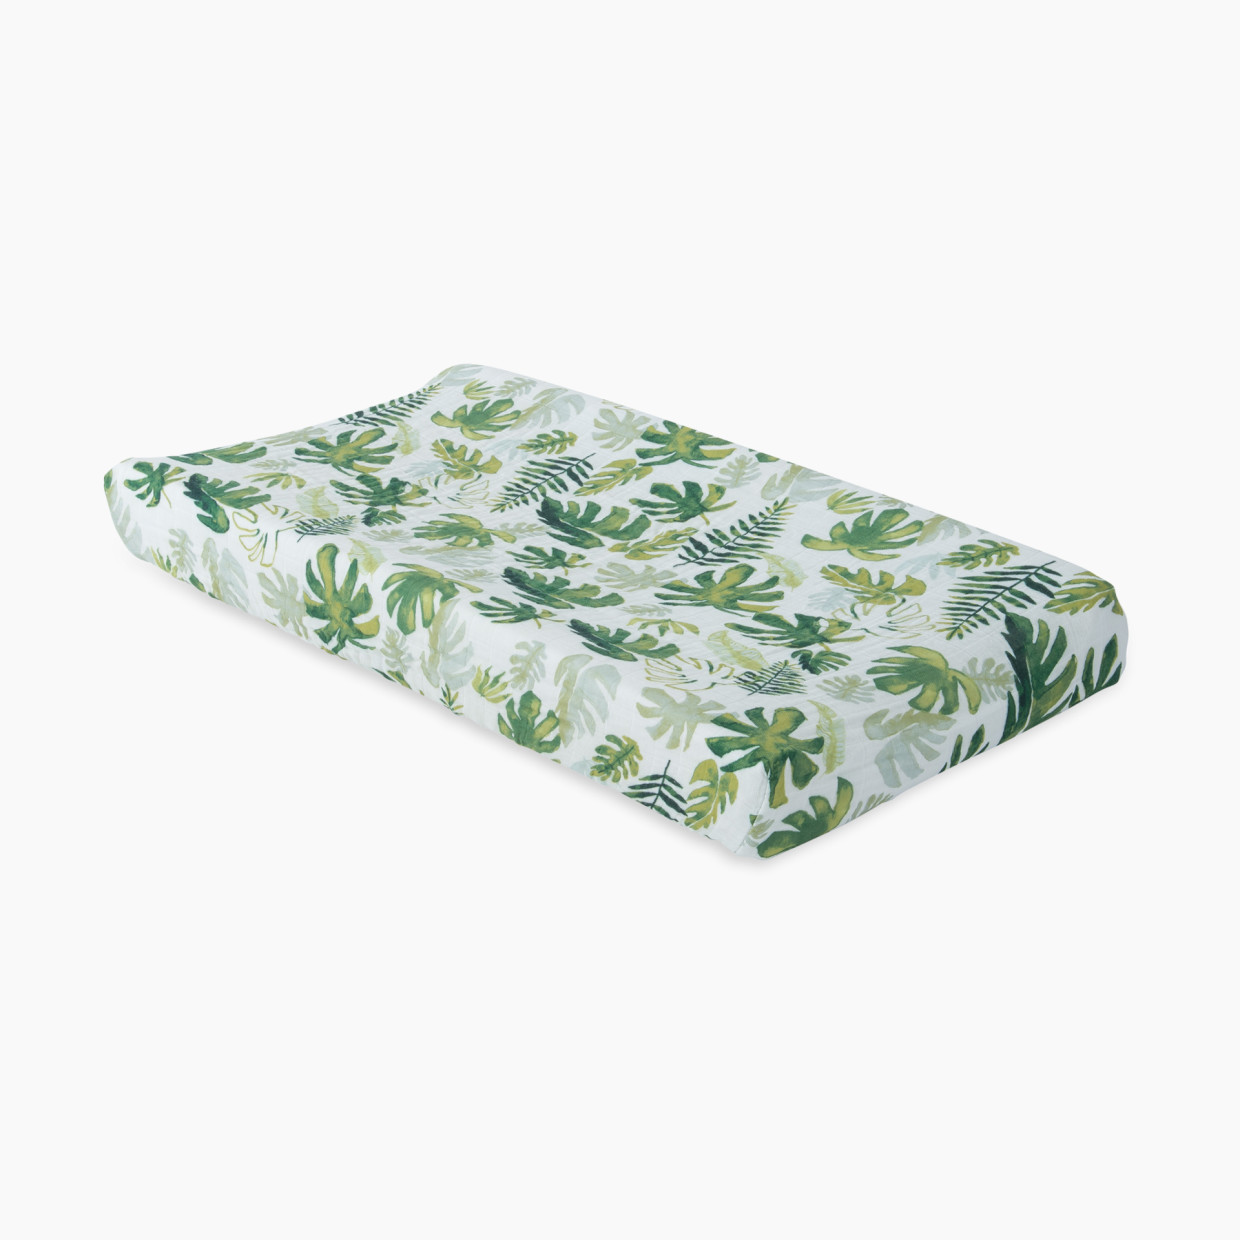 Little Unicorn Cotton Muslin Changing Pad Cover - Tropical Leaf.